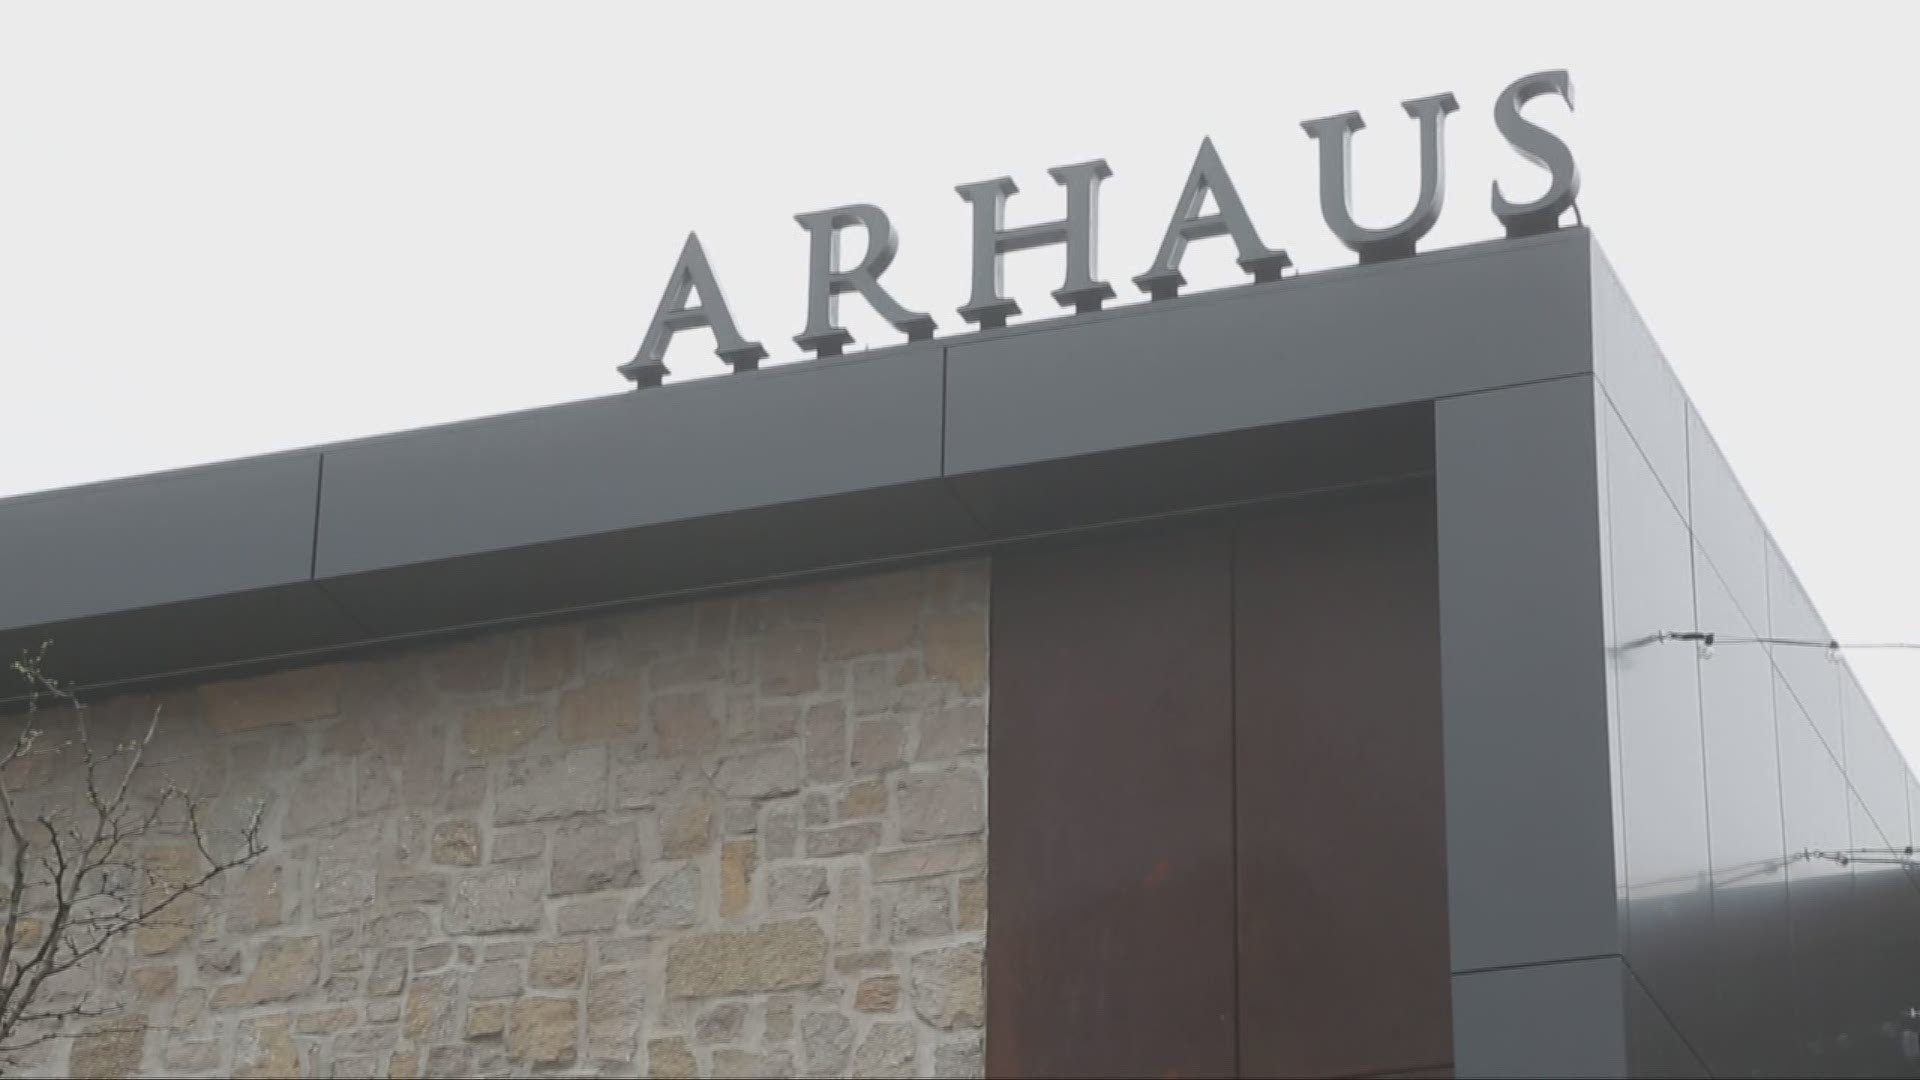 May 3, 2019: WKYC's Hollie Strano met up with Arhaus' CEO and Co-Founder John Reed to preview the new store, talk about the brand's Cleveland roots and more.